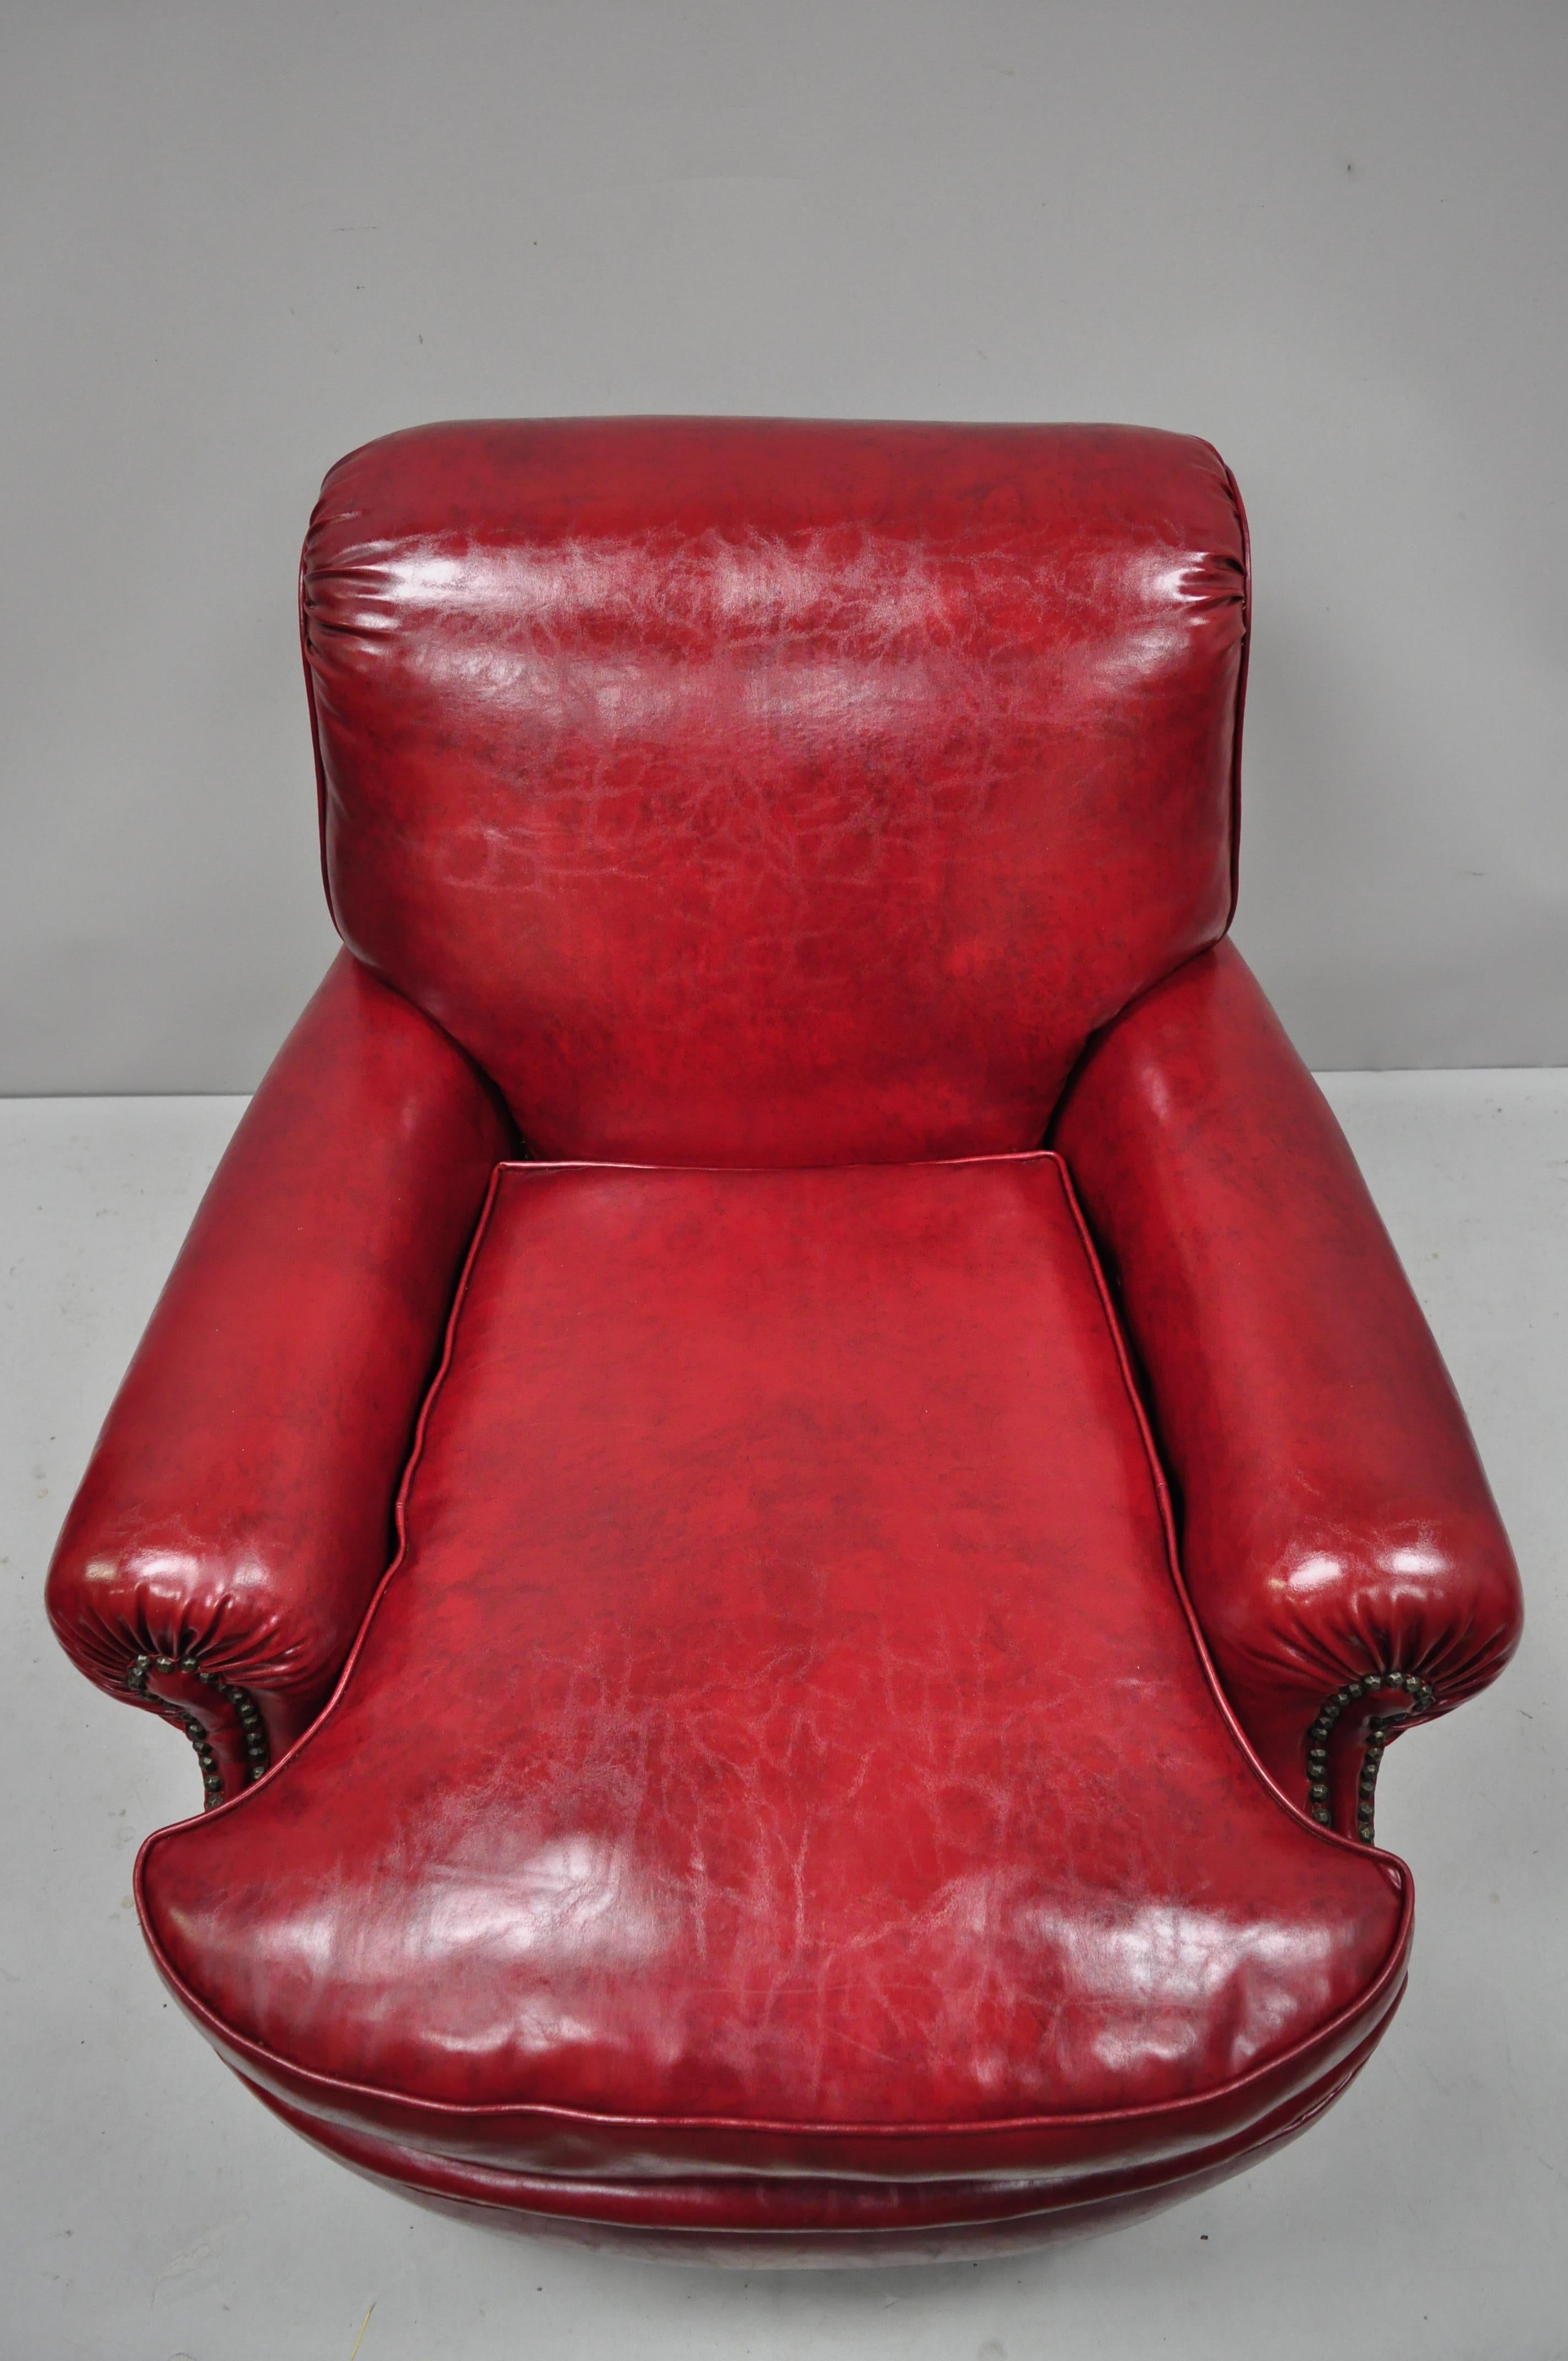 Antique English Regency style burgundy red vinyl faux leather club lounge chair. Item features rolling casters, deep comfortable cushion, nailhead trim, red/burgundy vinyl upholstery, rolled back and arms, solid wood frame, very nice vintage item,